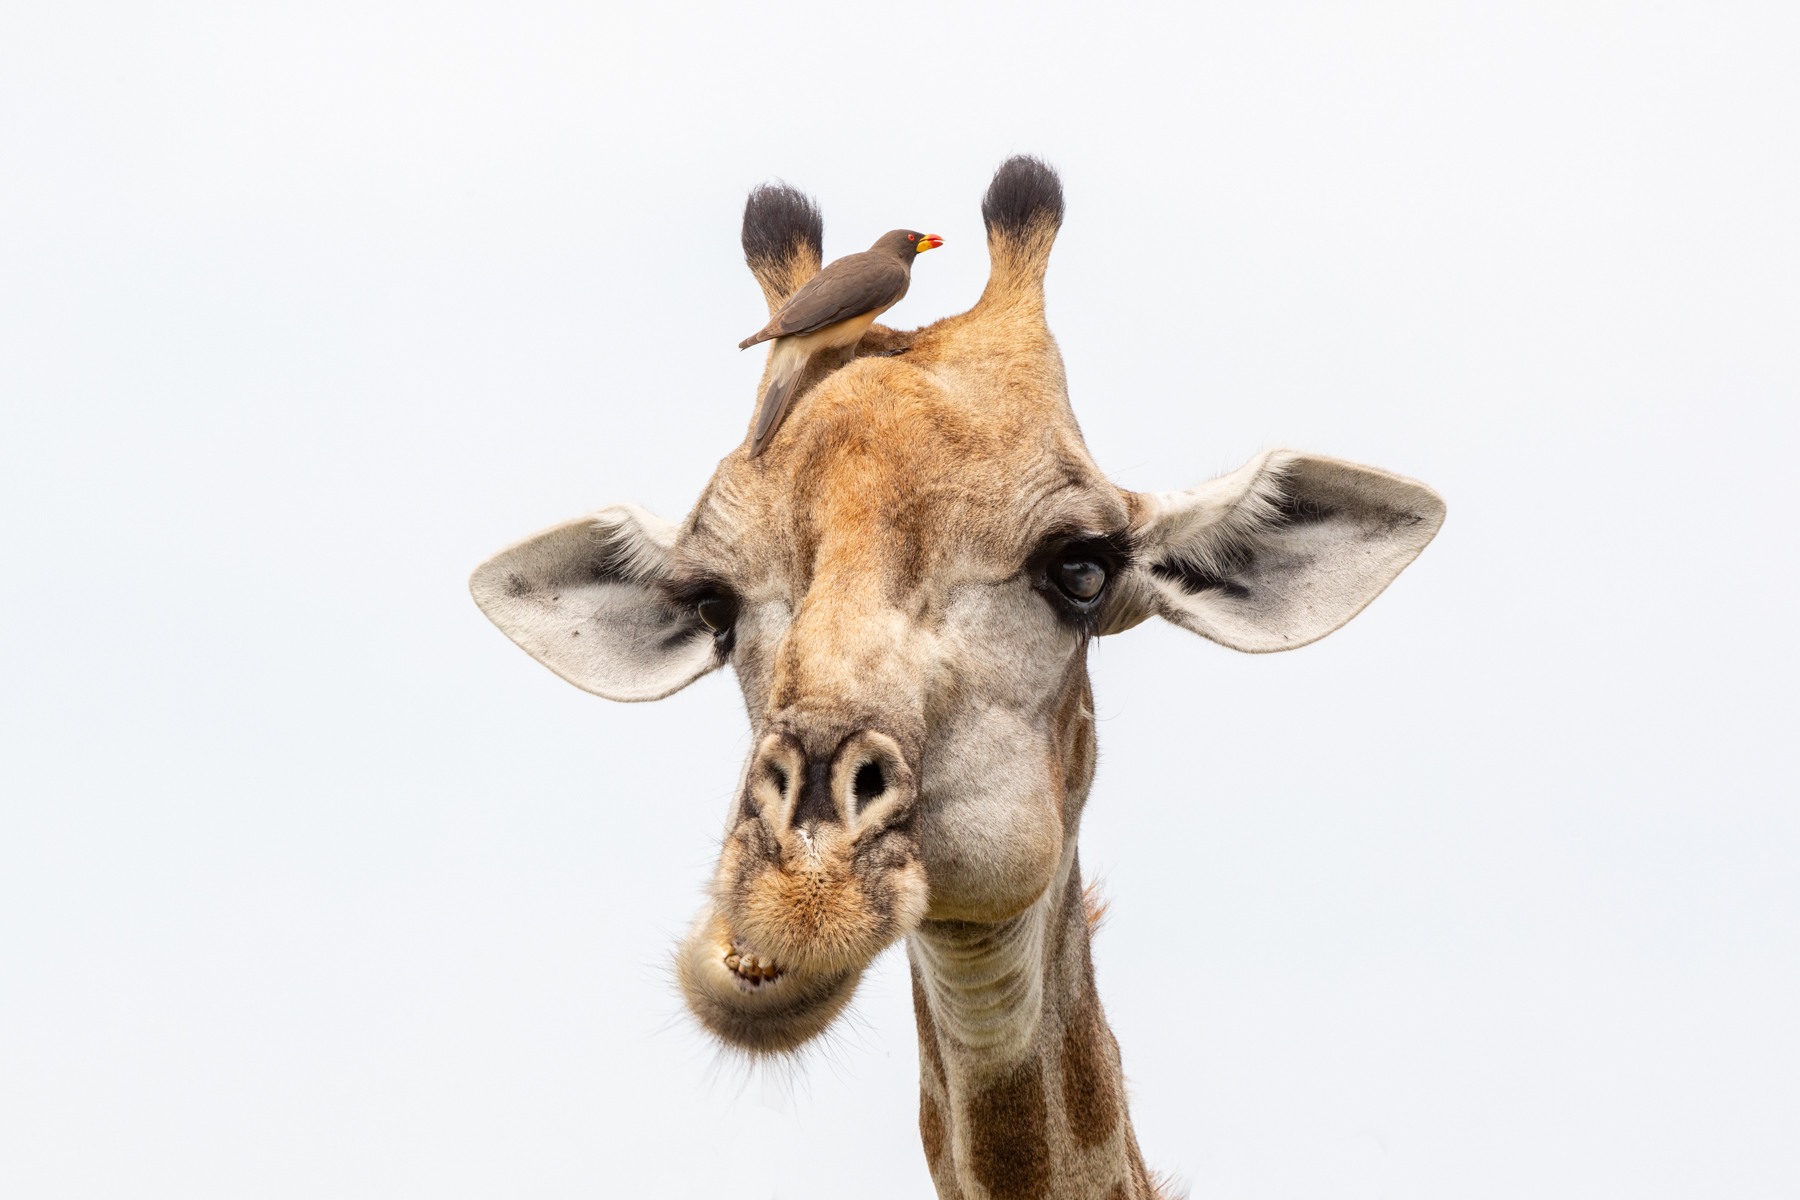 Oxpeckers are so annoying! Southern Giraffe and Yellow-billed Oxpecker on our Botswana safari